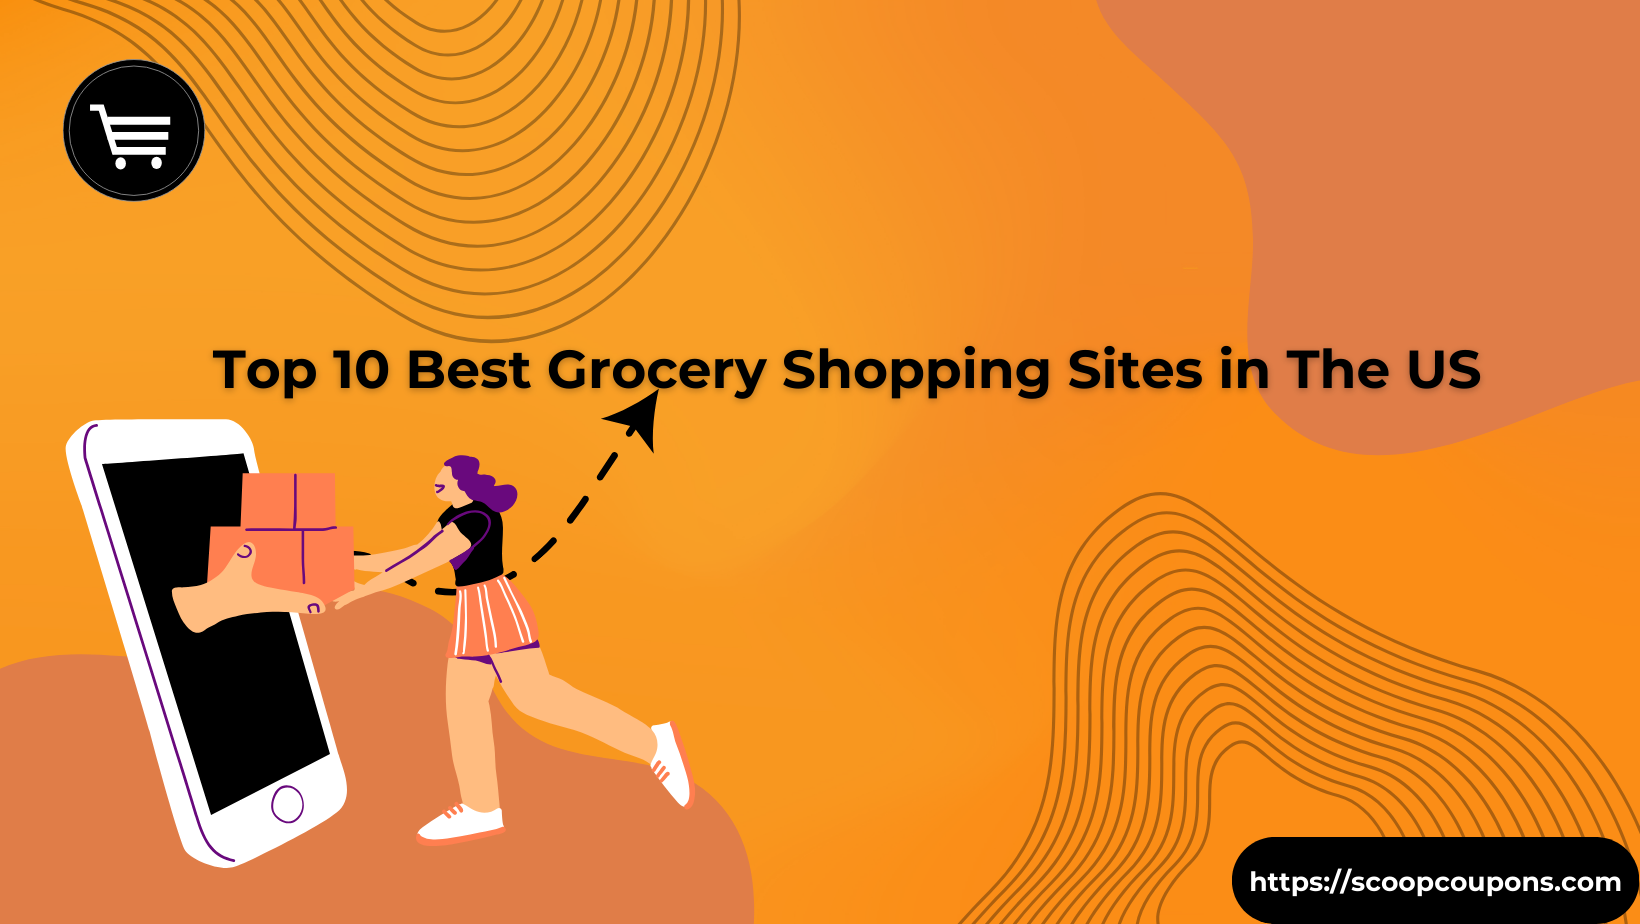 Top 10 Best Grocery Shopping Sites in The US